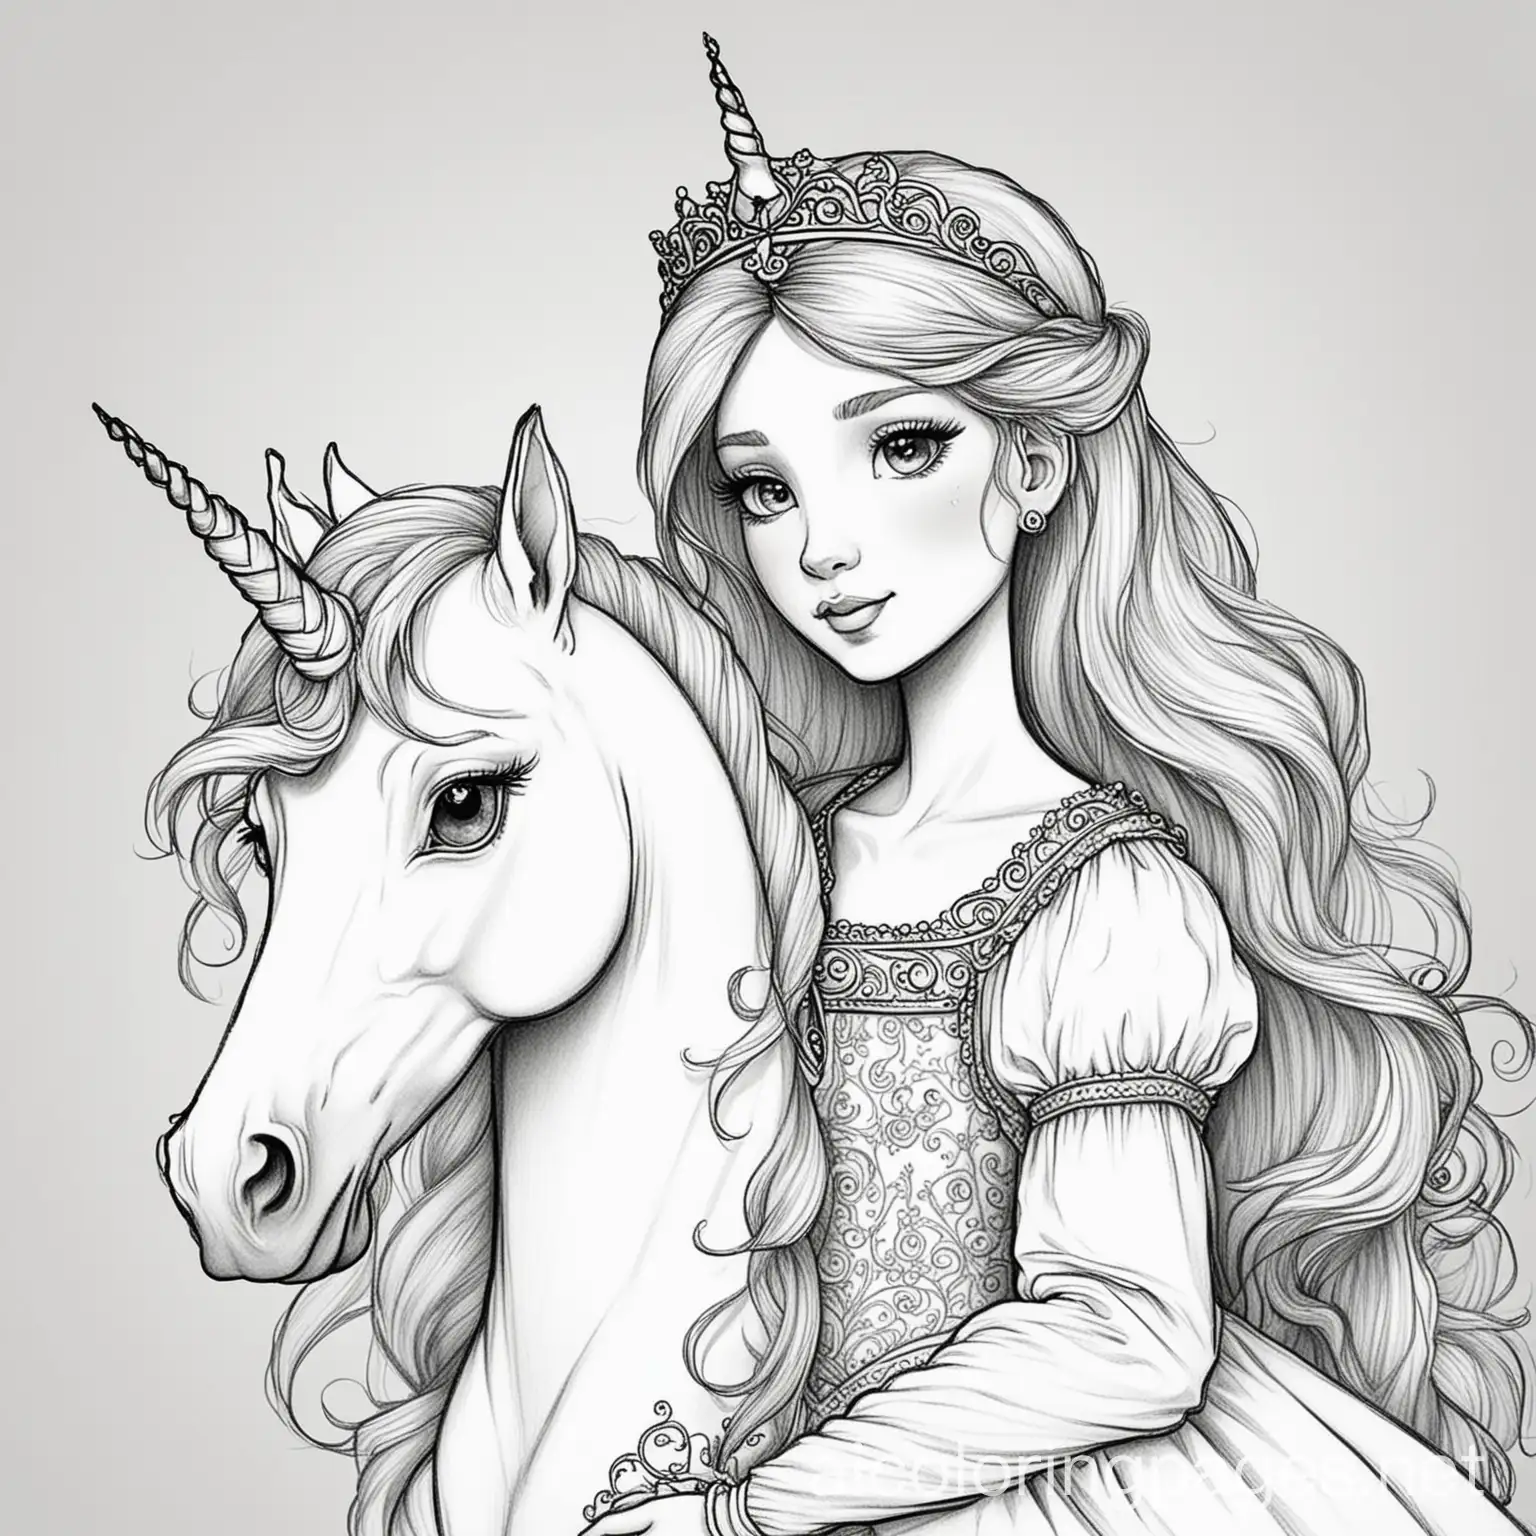 princess with unicorn
, Coloring Page, black and white, line art, white background, Simplicity, Ample White Space. The background of the coloring page is plain white to make it easy for young children to color within the lines. The outlines of all the subjects are easy to distinguish, making it simple for kids to color without too much difficulty